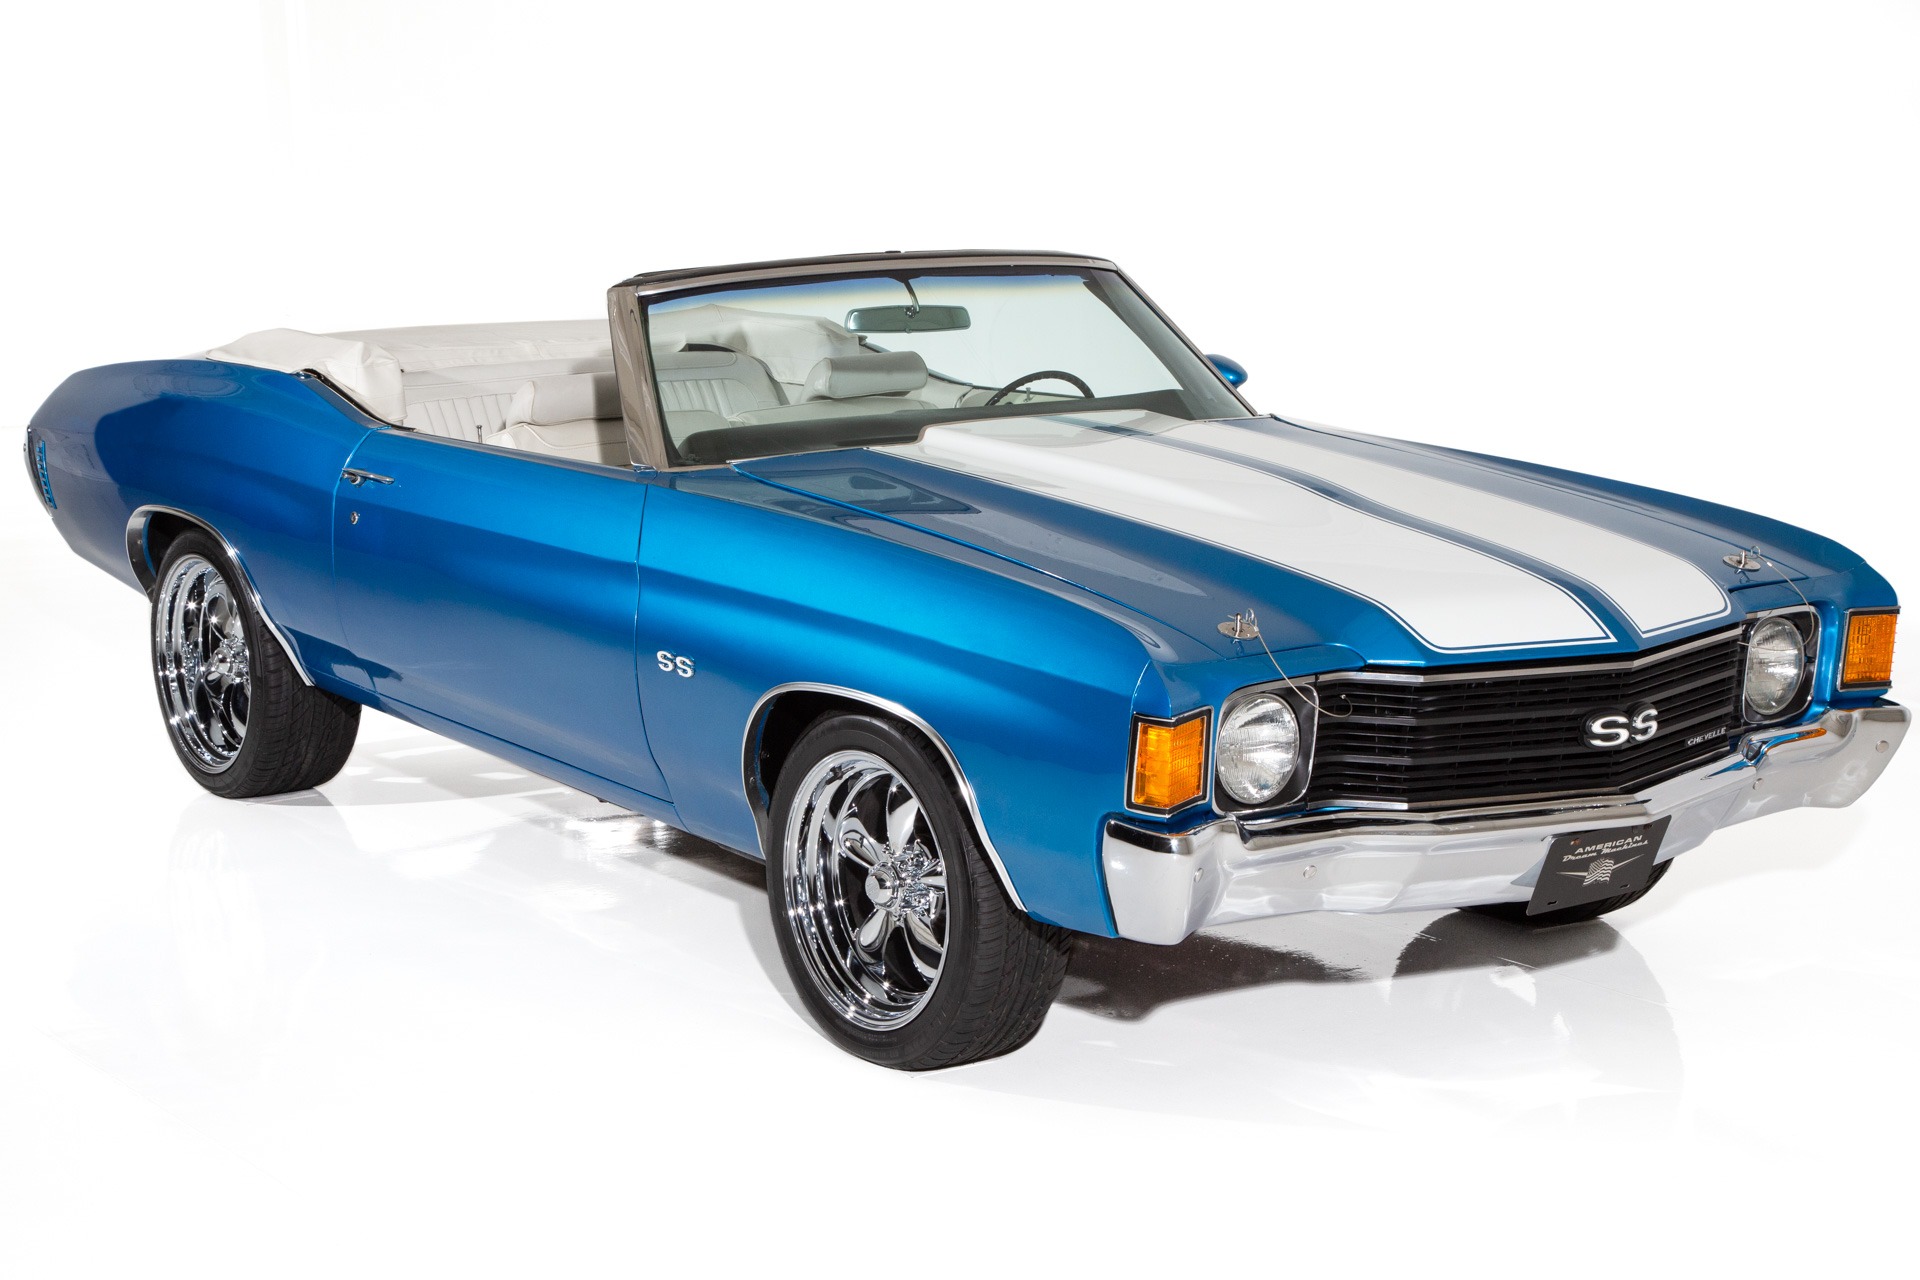 For Sale Used 1972 Chevrolet Chevelle SS #s Match Build Sheet | American Dream Machines Des Moines IA 50309